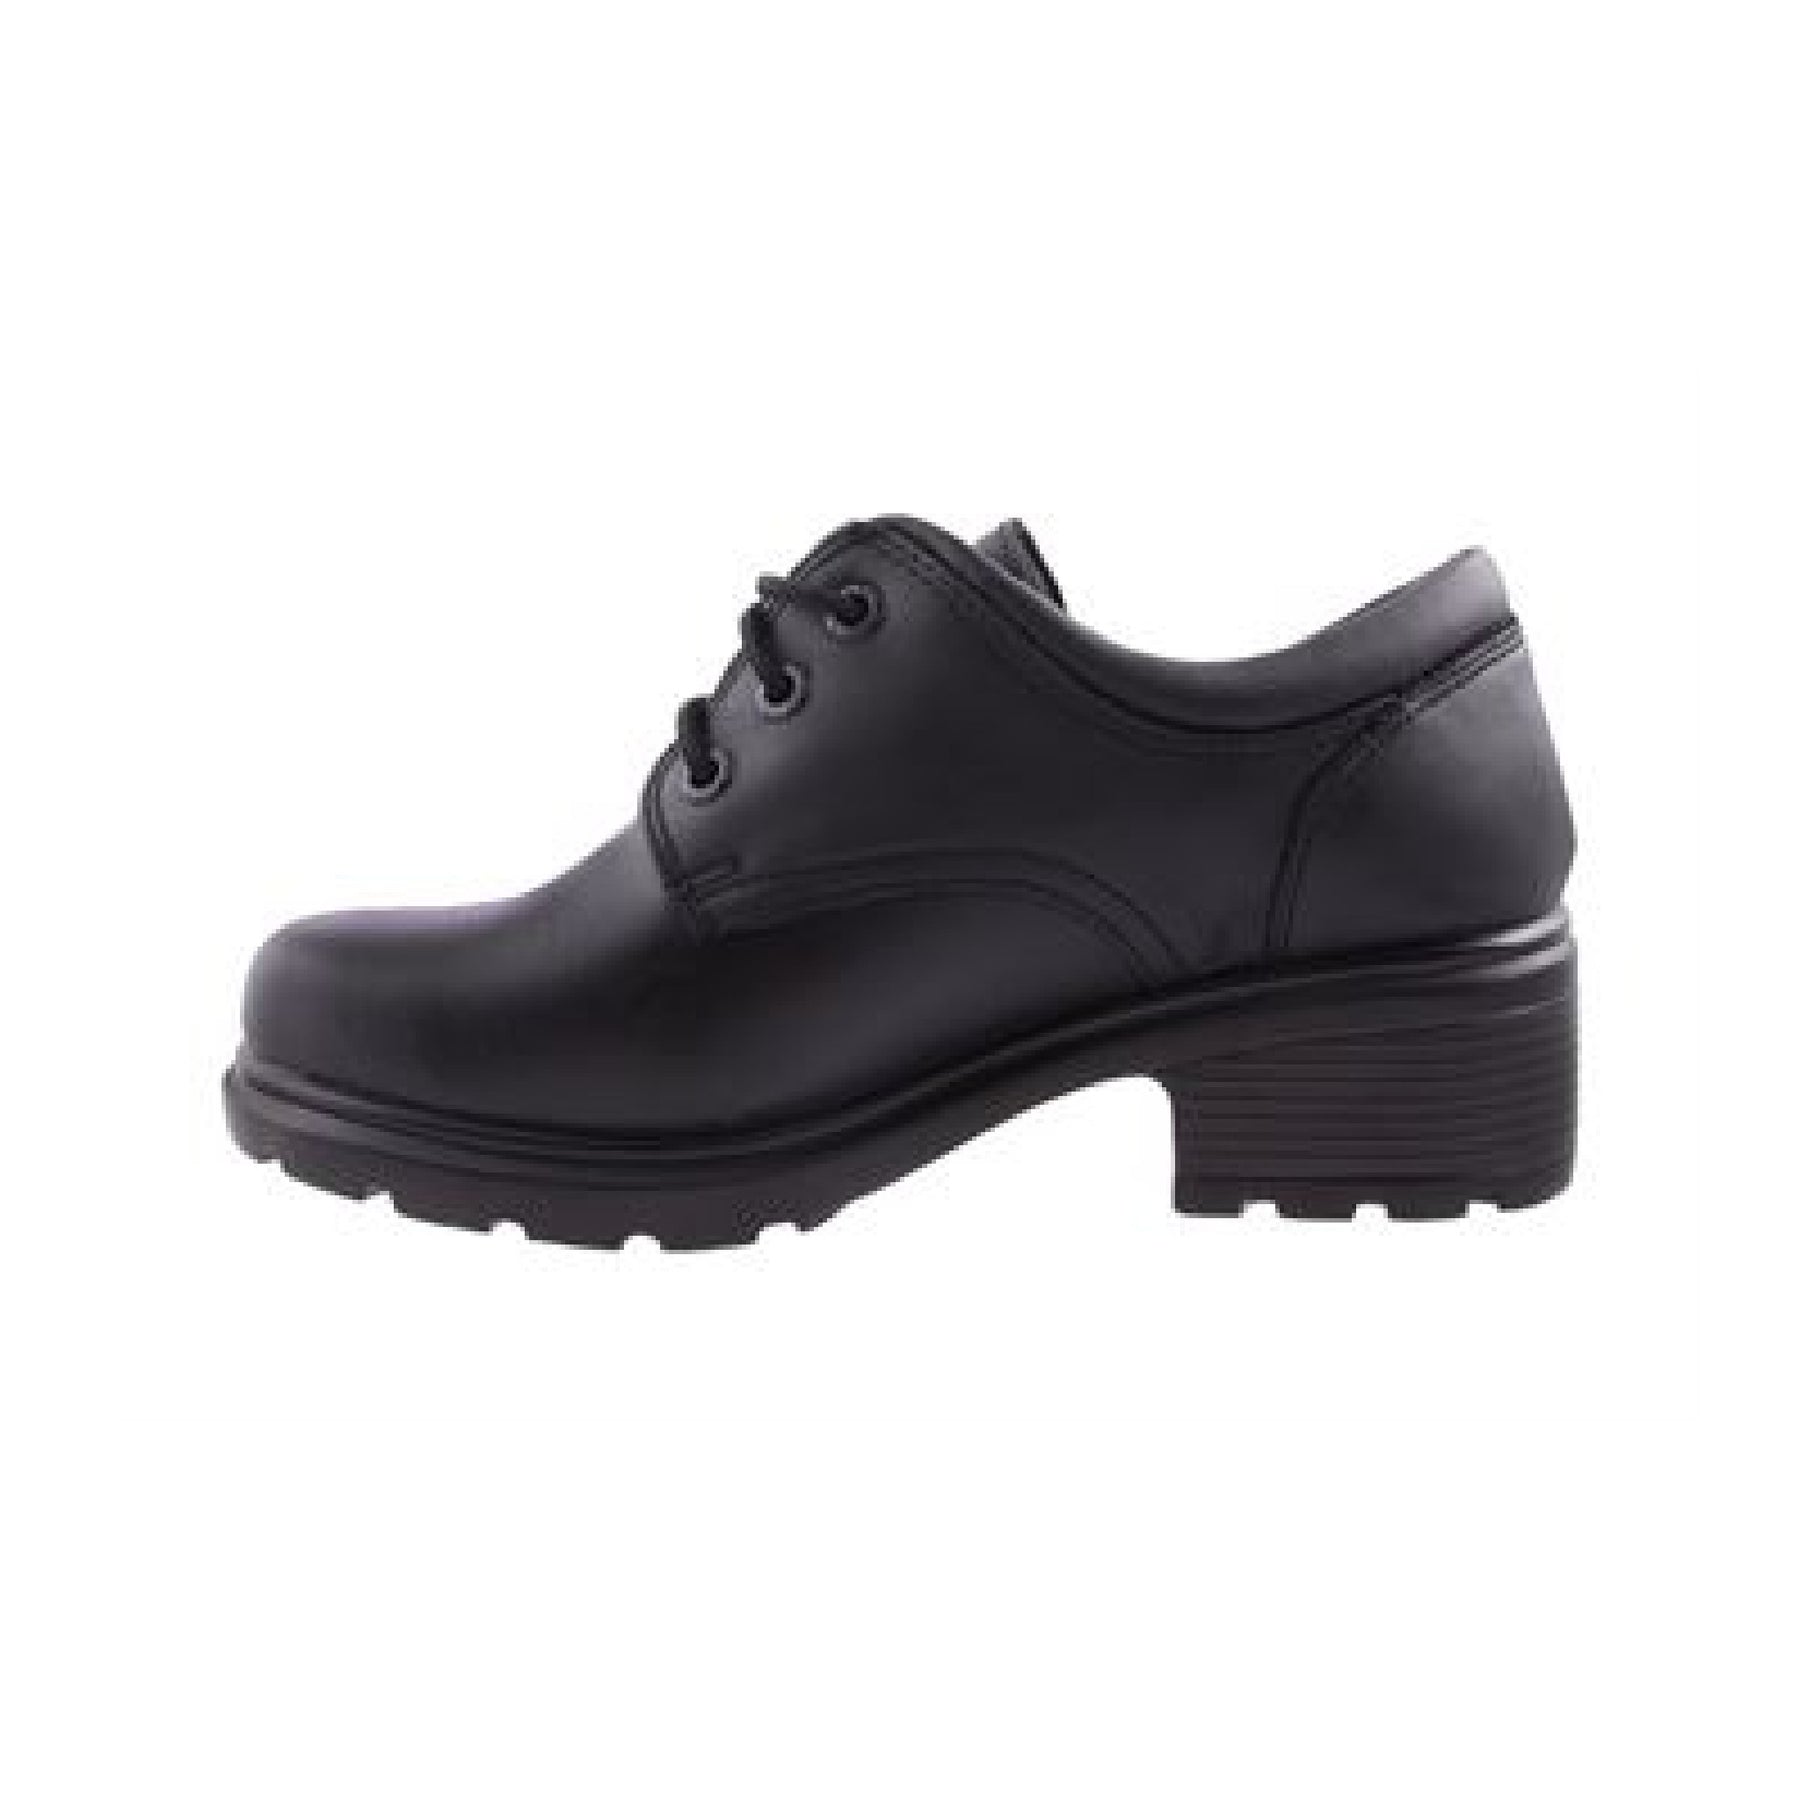 GALORI Black High Heel School Shoes Shoes Shoes Loafers Casual Shoes (Size  : 35): Buy Online at Best Price in UAE - Amazon.ae